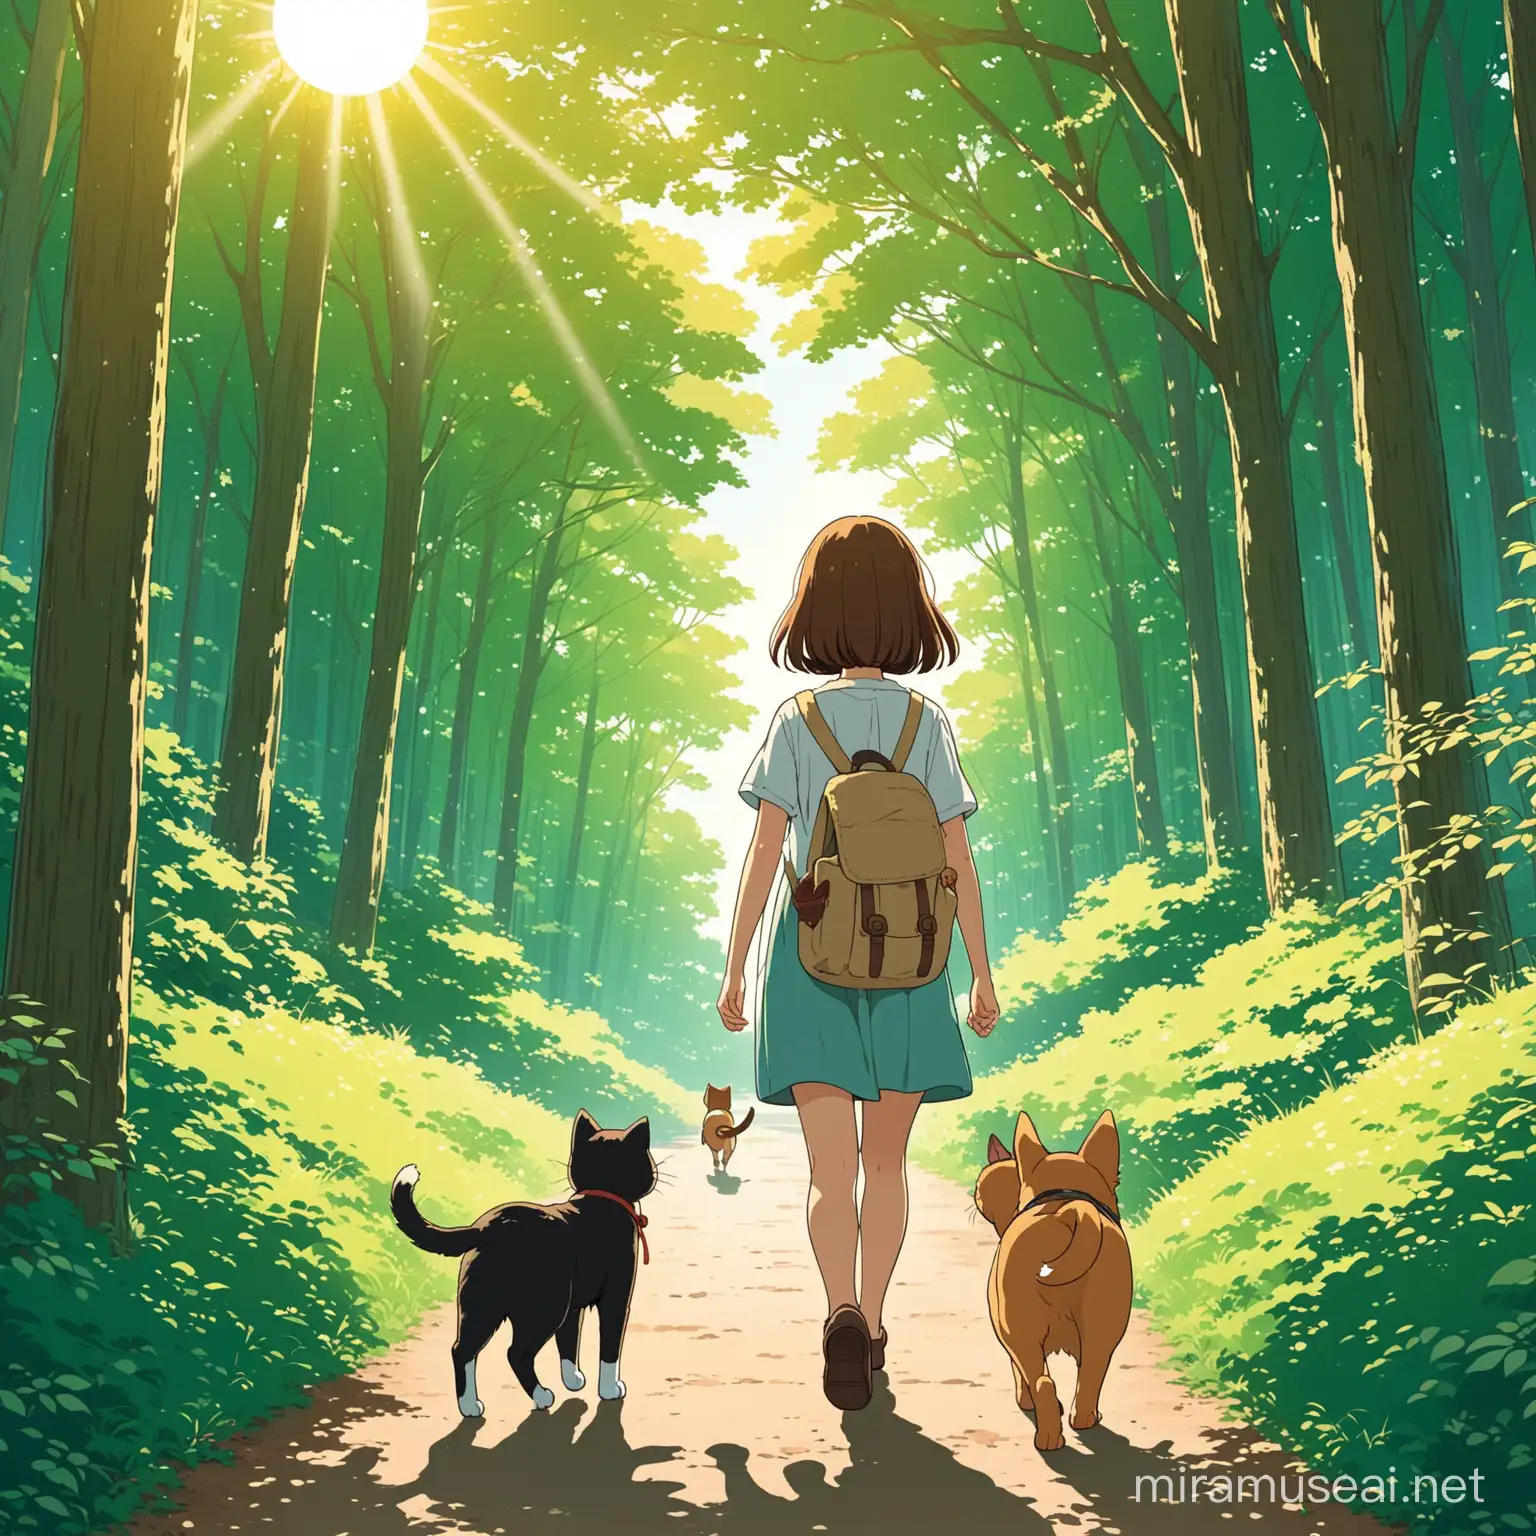 A pretty girl was walking in the forest with a cute cat and a dog. This scene has been illustrated in the style of Hayao Miyazaki's characters. The background features green trees and the sun --ar 21:32